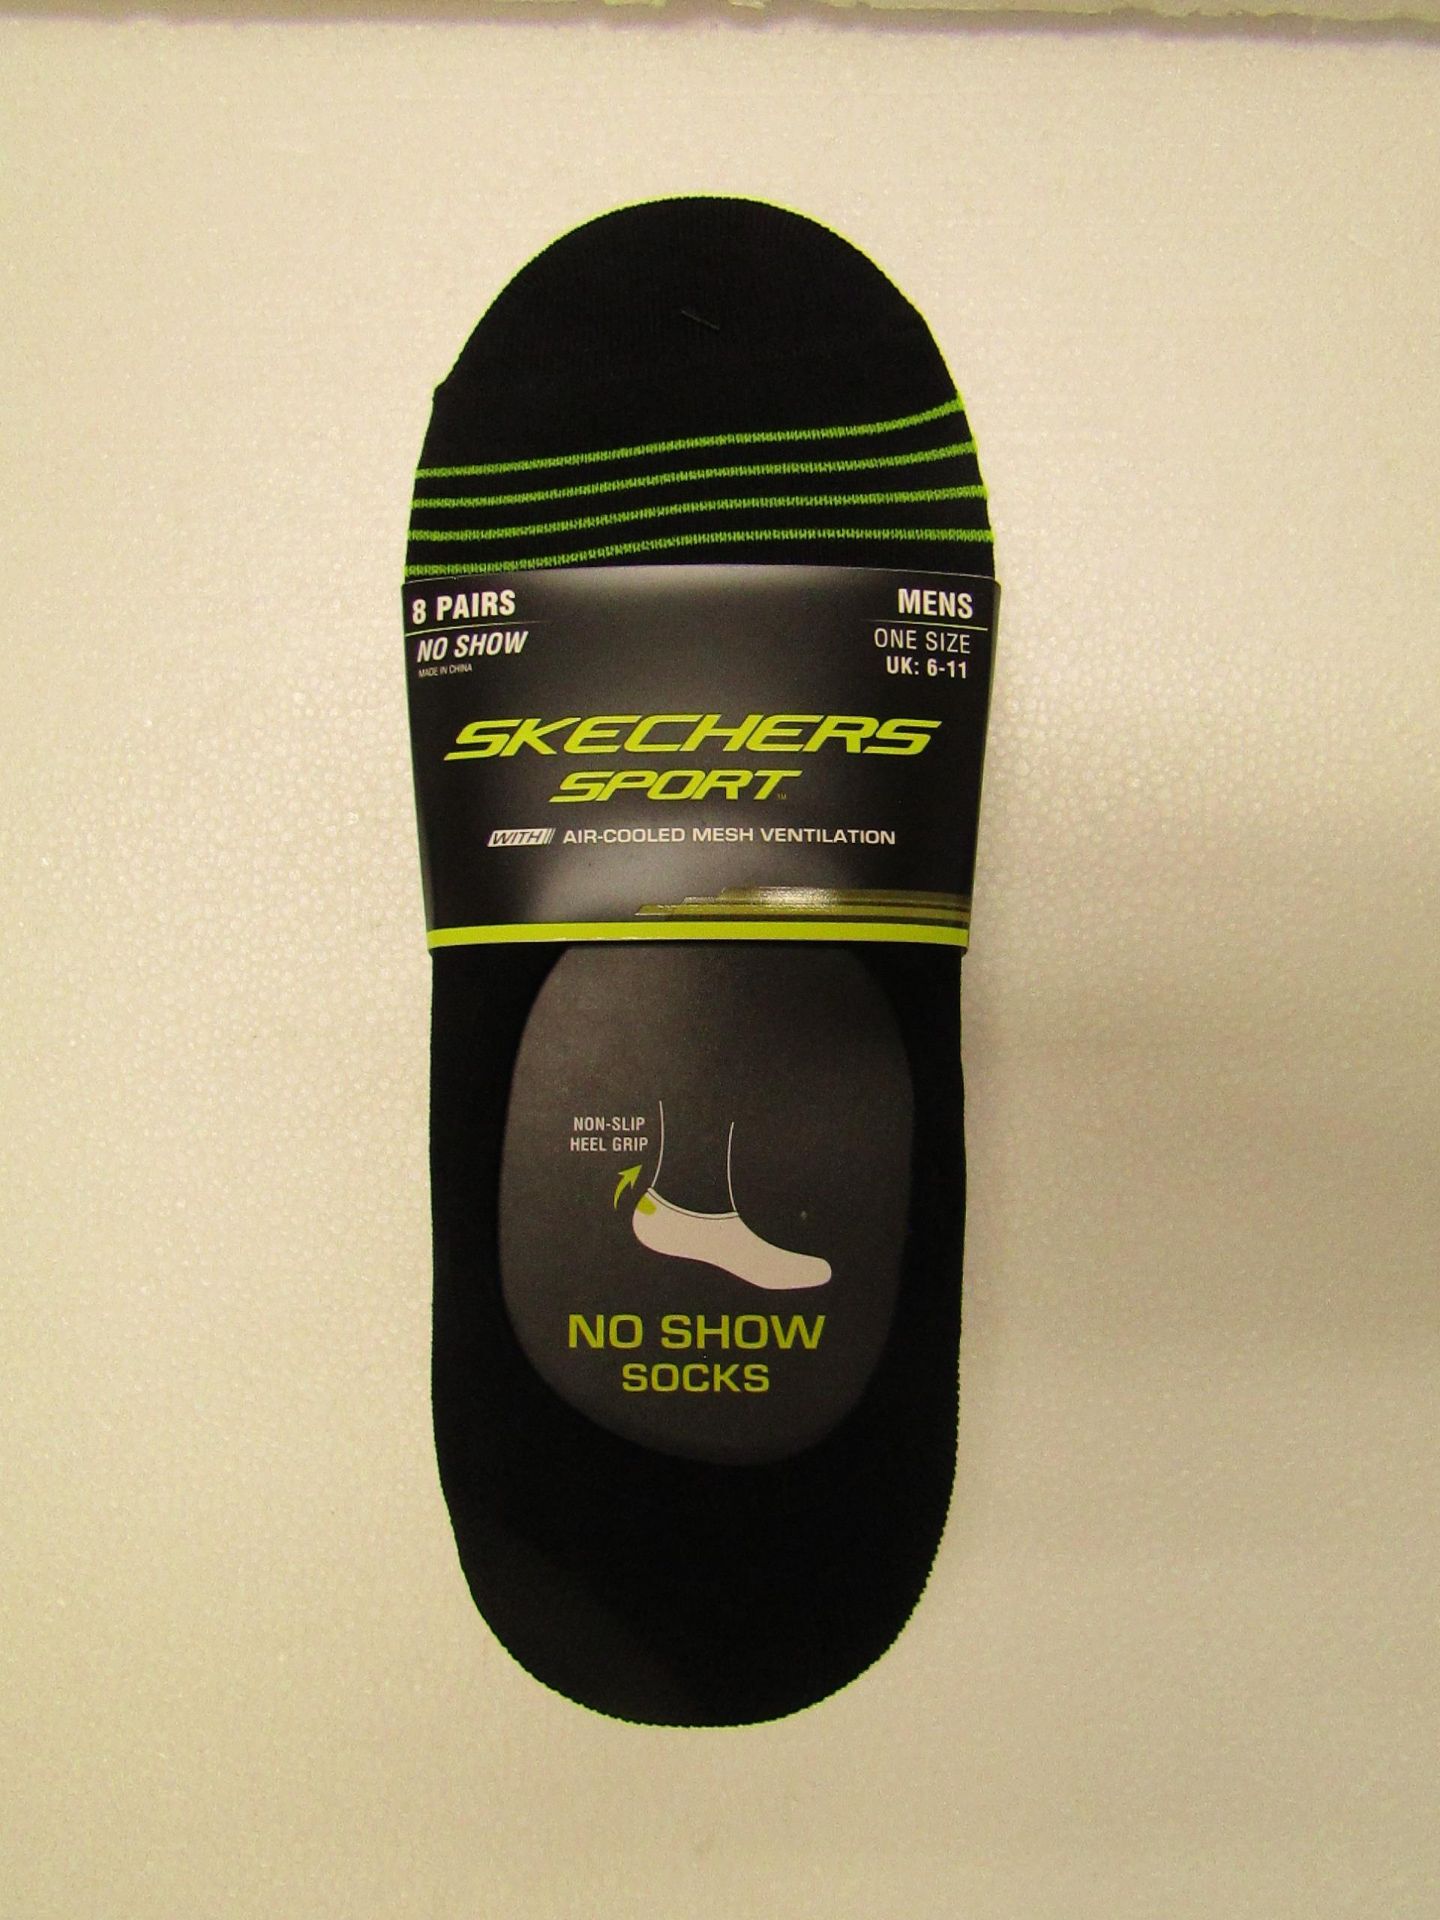 3x Packs of 8 Skechers Sport No Show Socks - New & Packaged - Mens UK Size 8-11 - See Pictures for